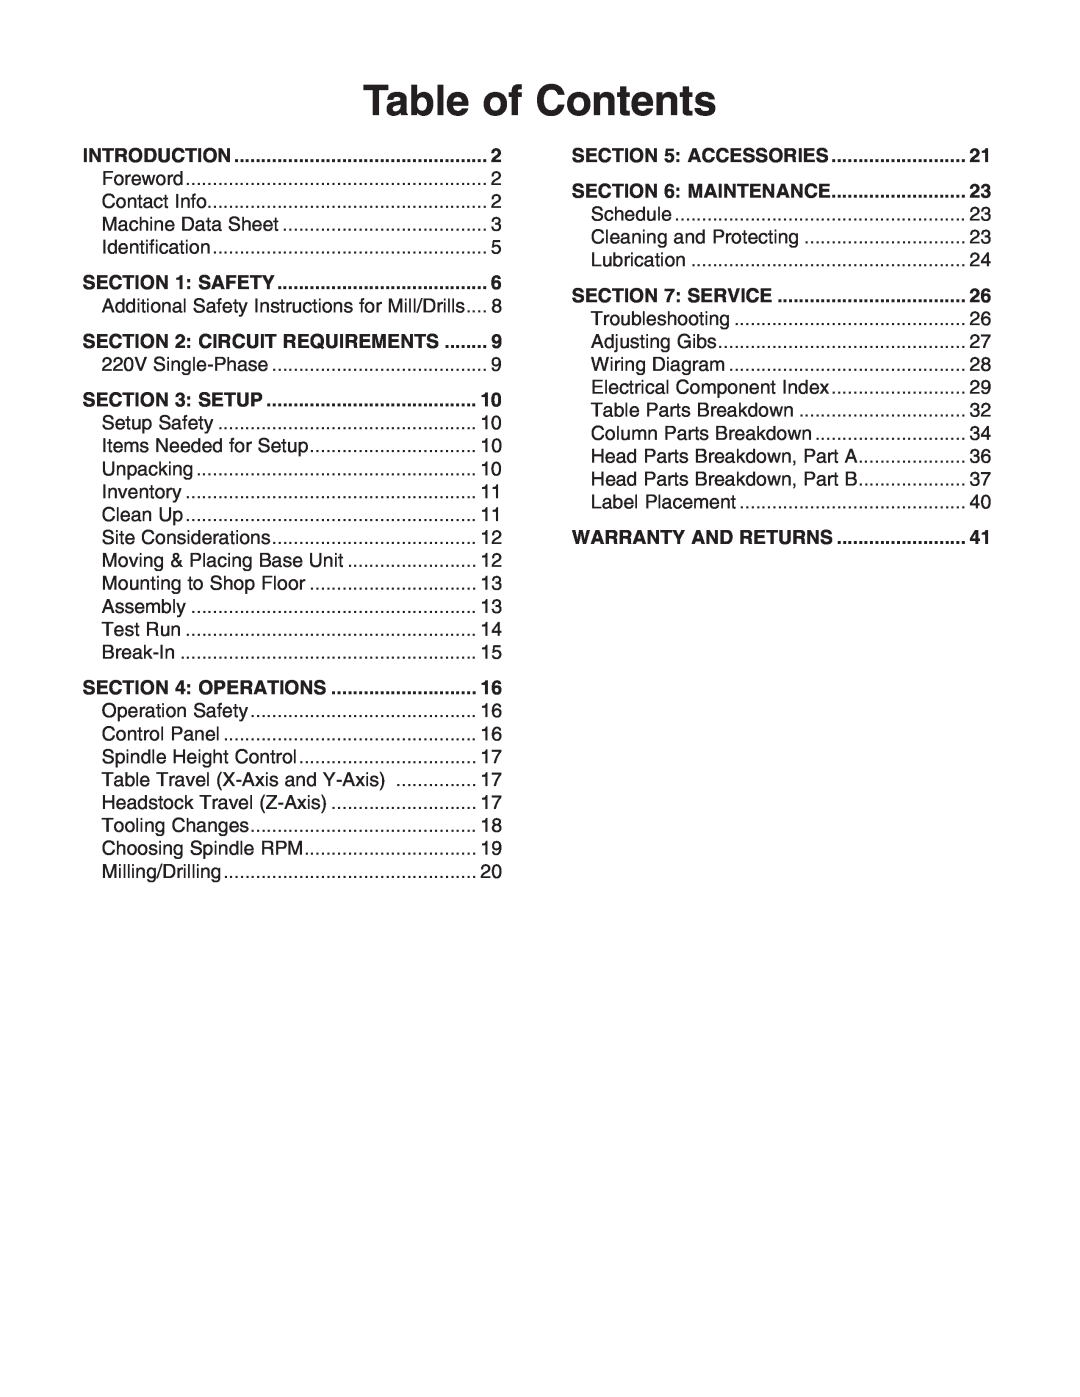 Grizzly G0484 owner manual Table of Contents, Setup, Operations, Maintenance, Service, Warranty And Returns 